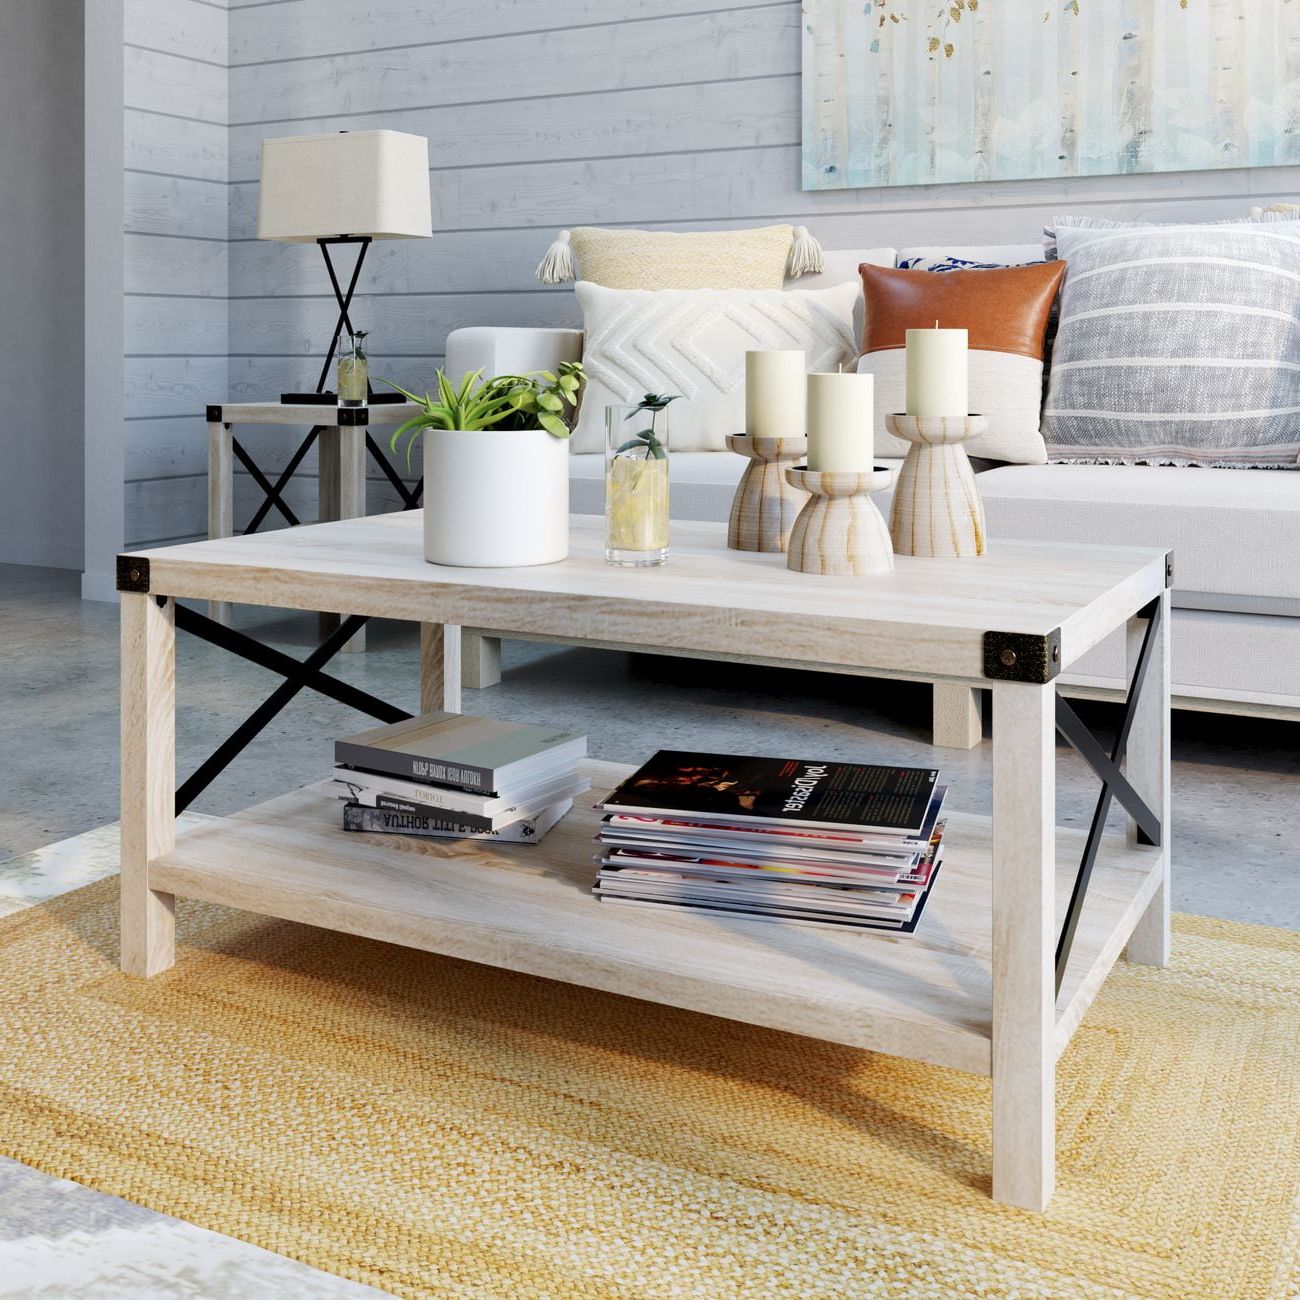 Favorite Woven Paths Magnolia Metal X Coffee Table, White Oak – Walmart With Regard To Woven Paths Coffee Tables (Photo 1 of 15)